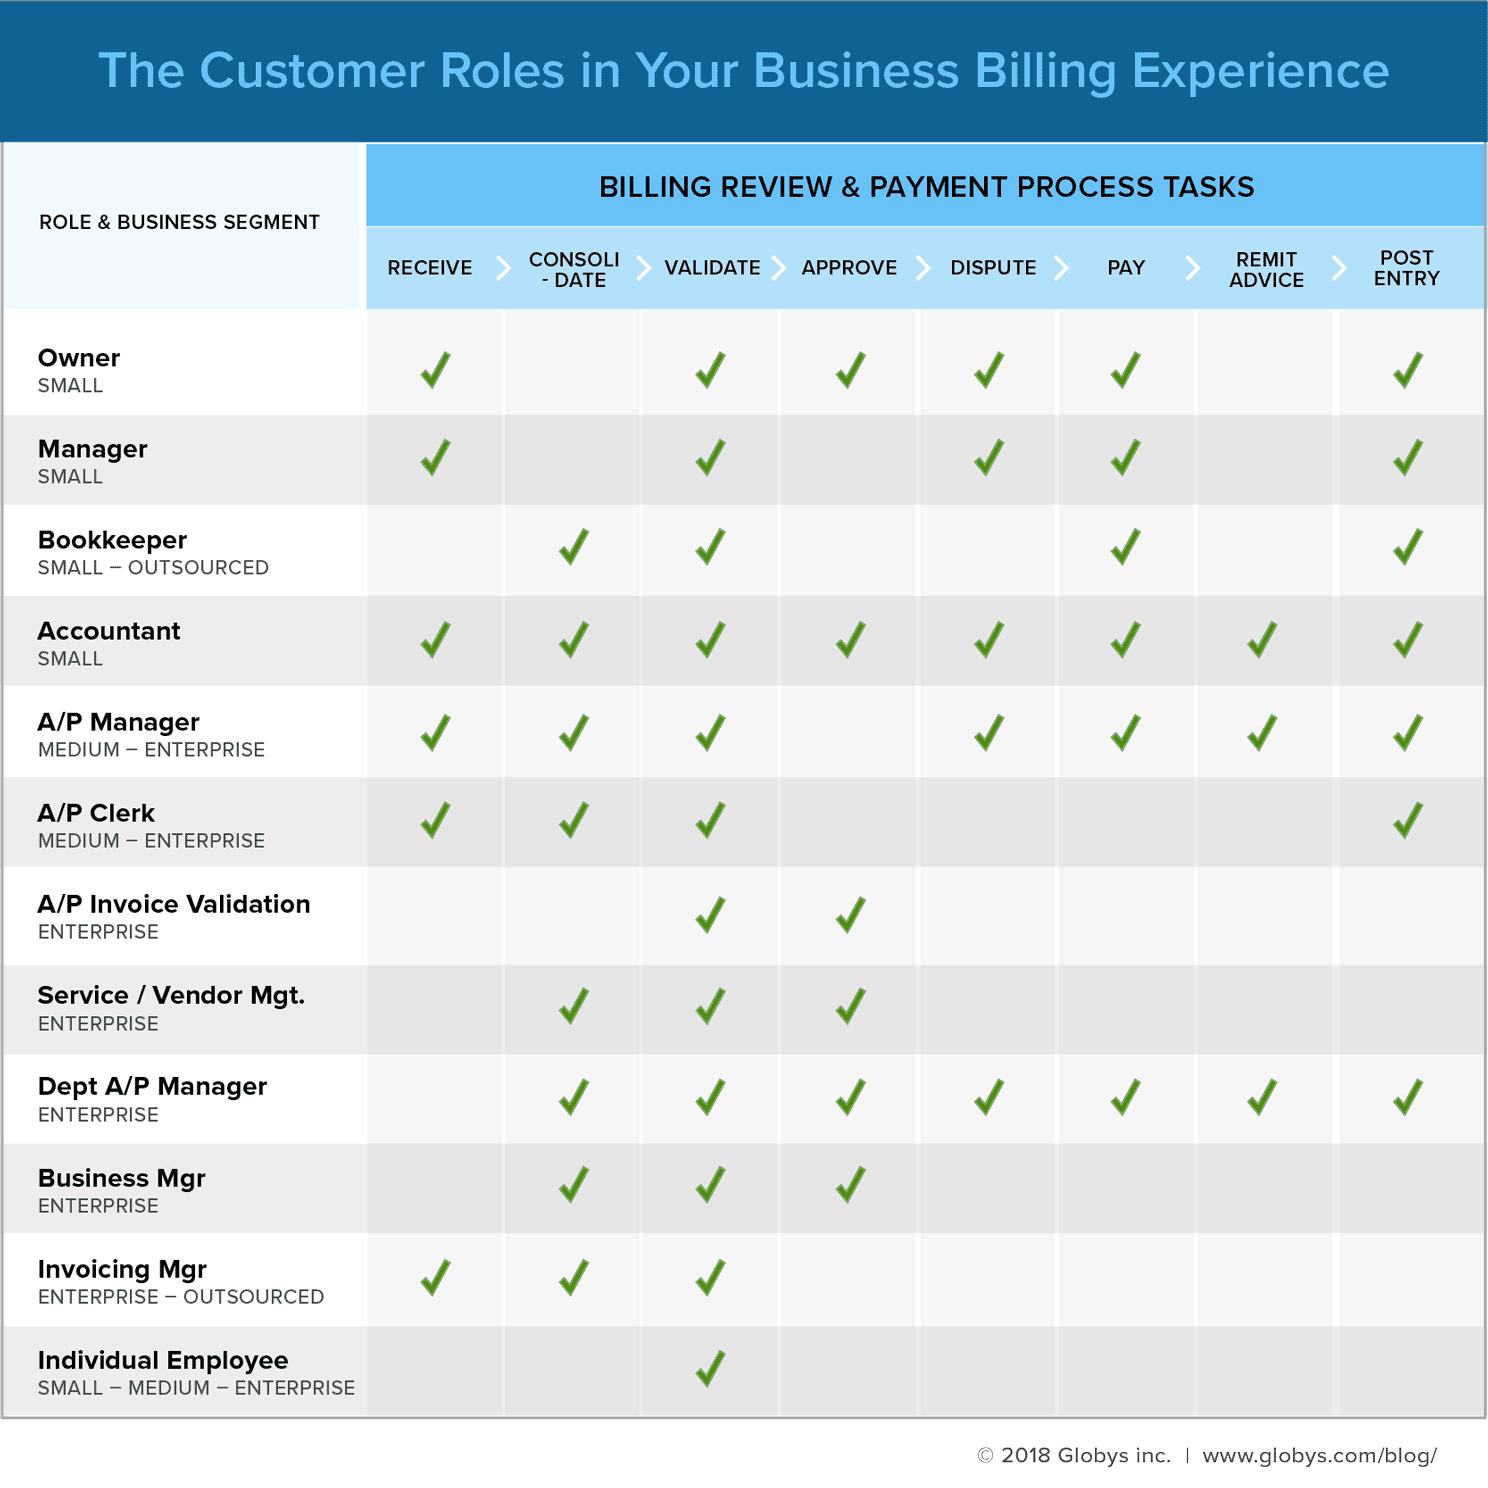 Billing & Invoicing Experience: Personas and Roles